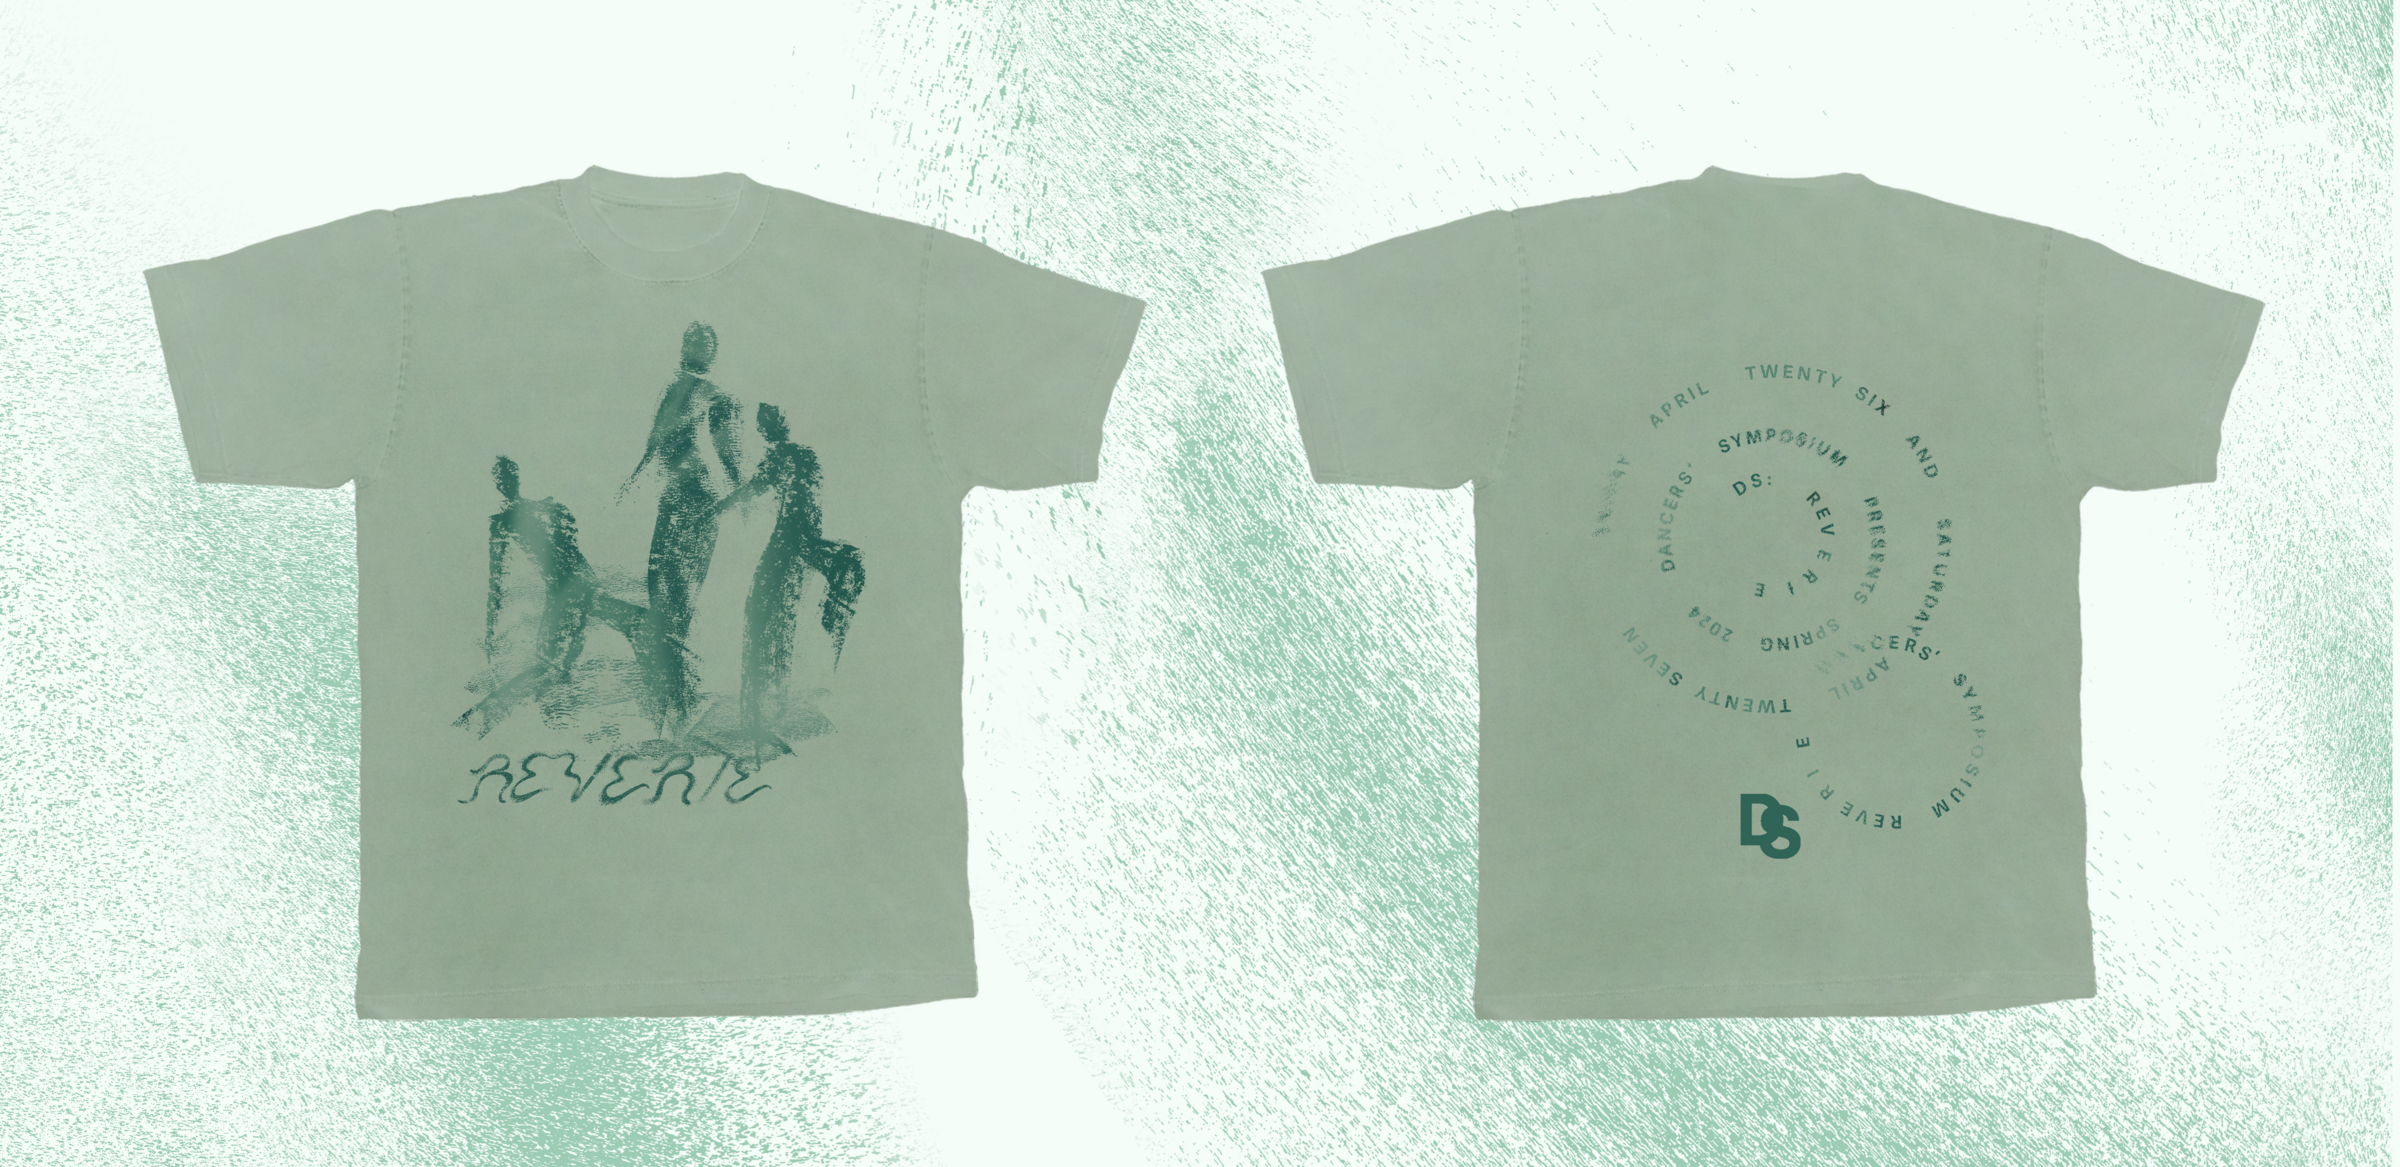 The t-shirt designs for Reverie